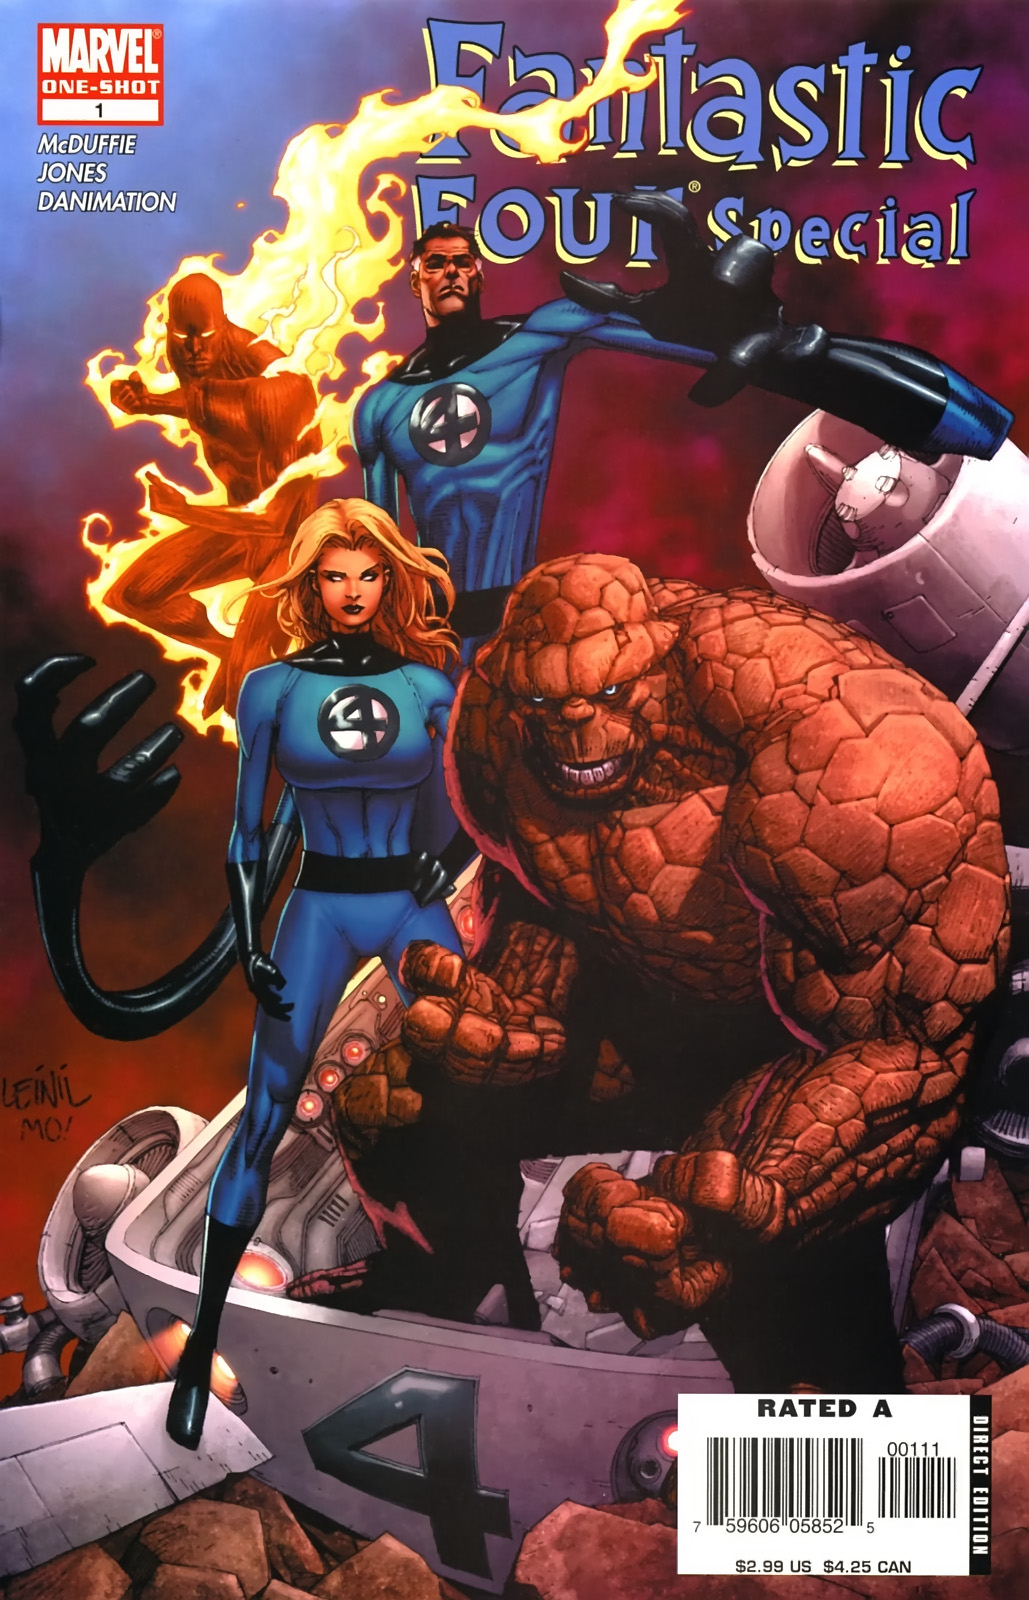 Read online Fantastic Four Special comic -  Issue # Full - 1